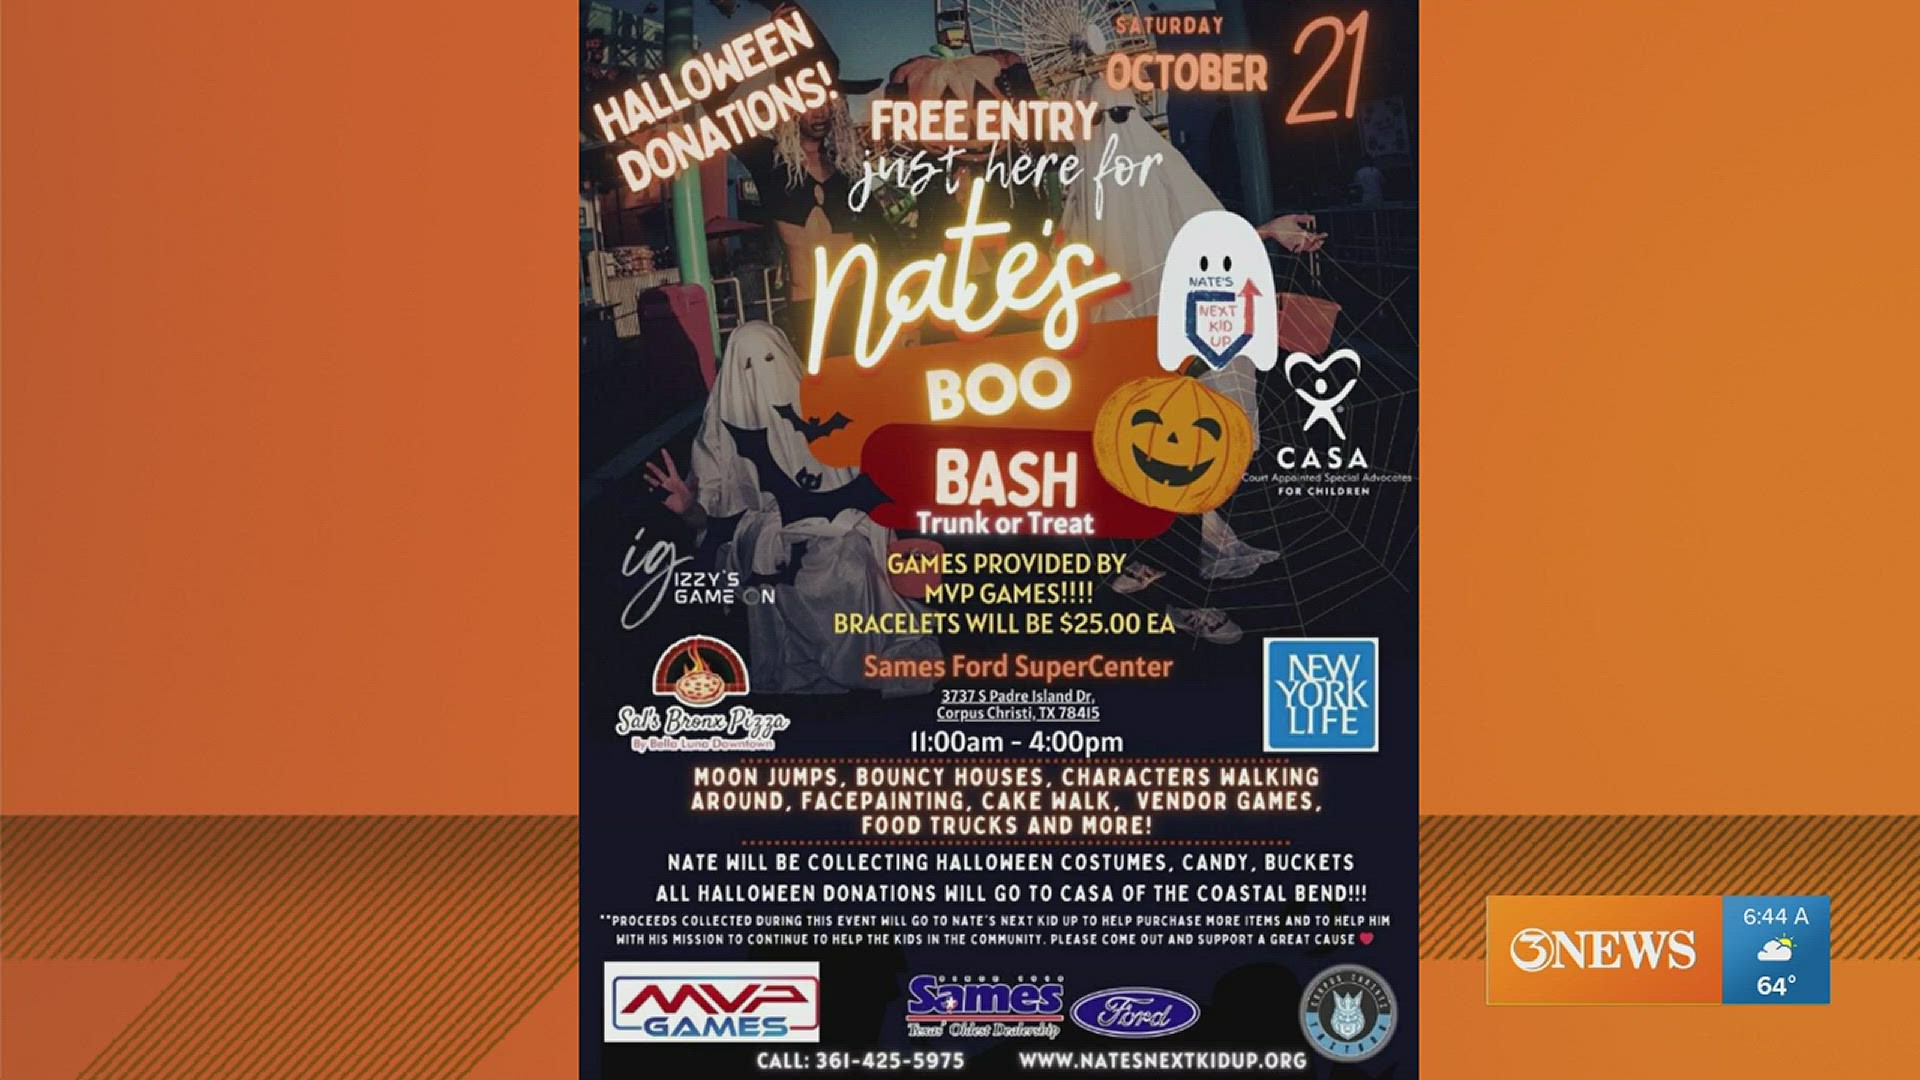 Donate Halloween costumes and candy at Sames Ford Supercenter - donations will help CASA of the Coastal Bend youth.